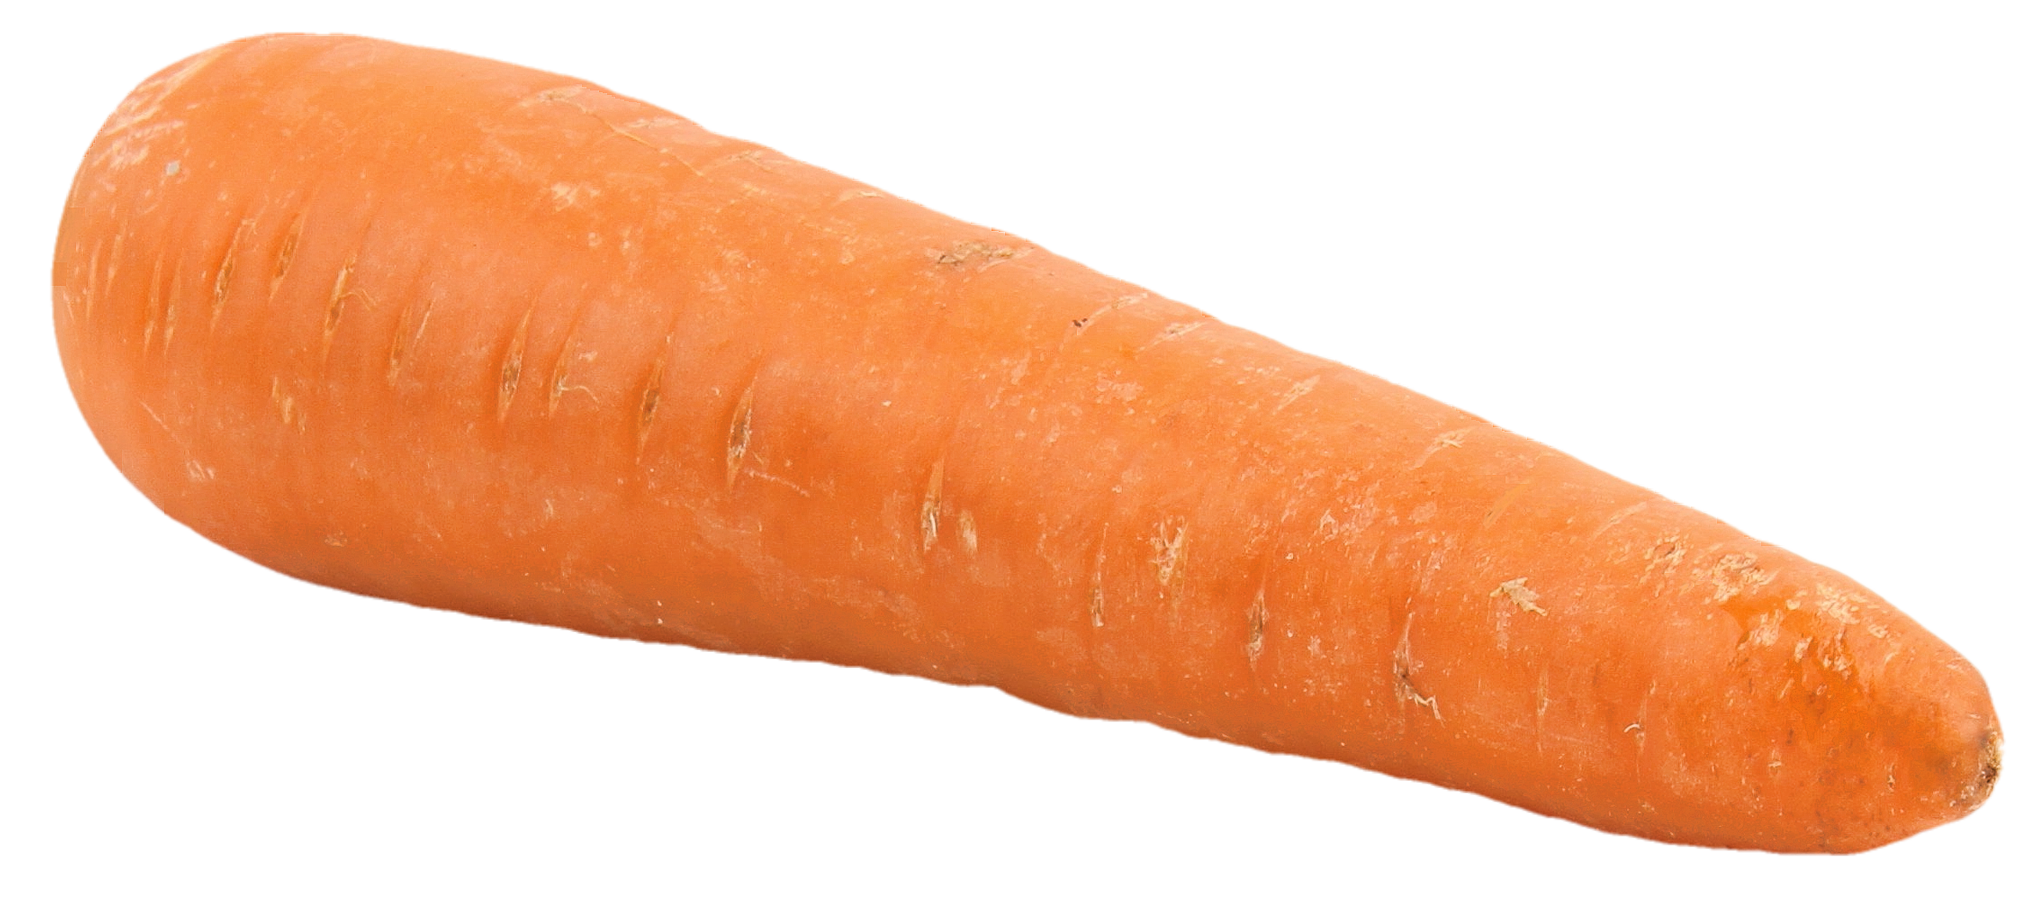 Carrot PNG Image